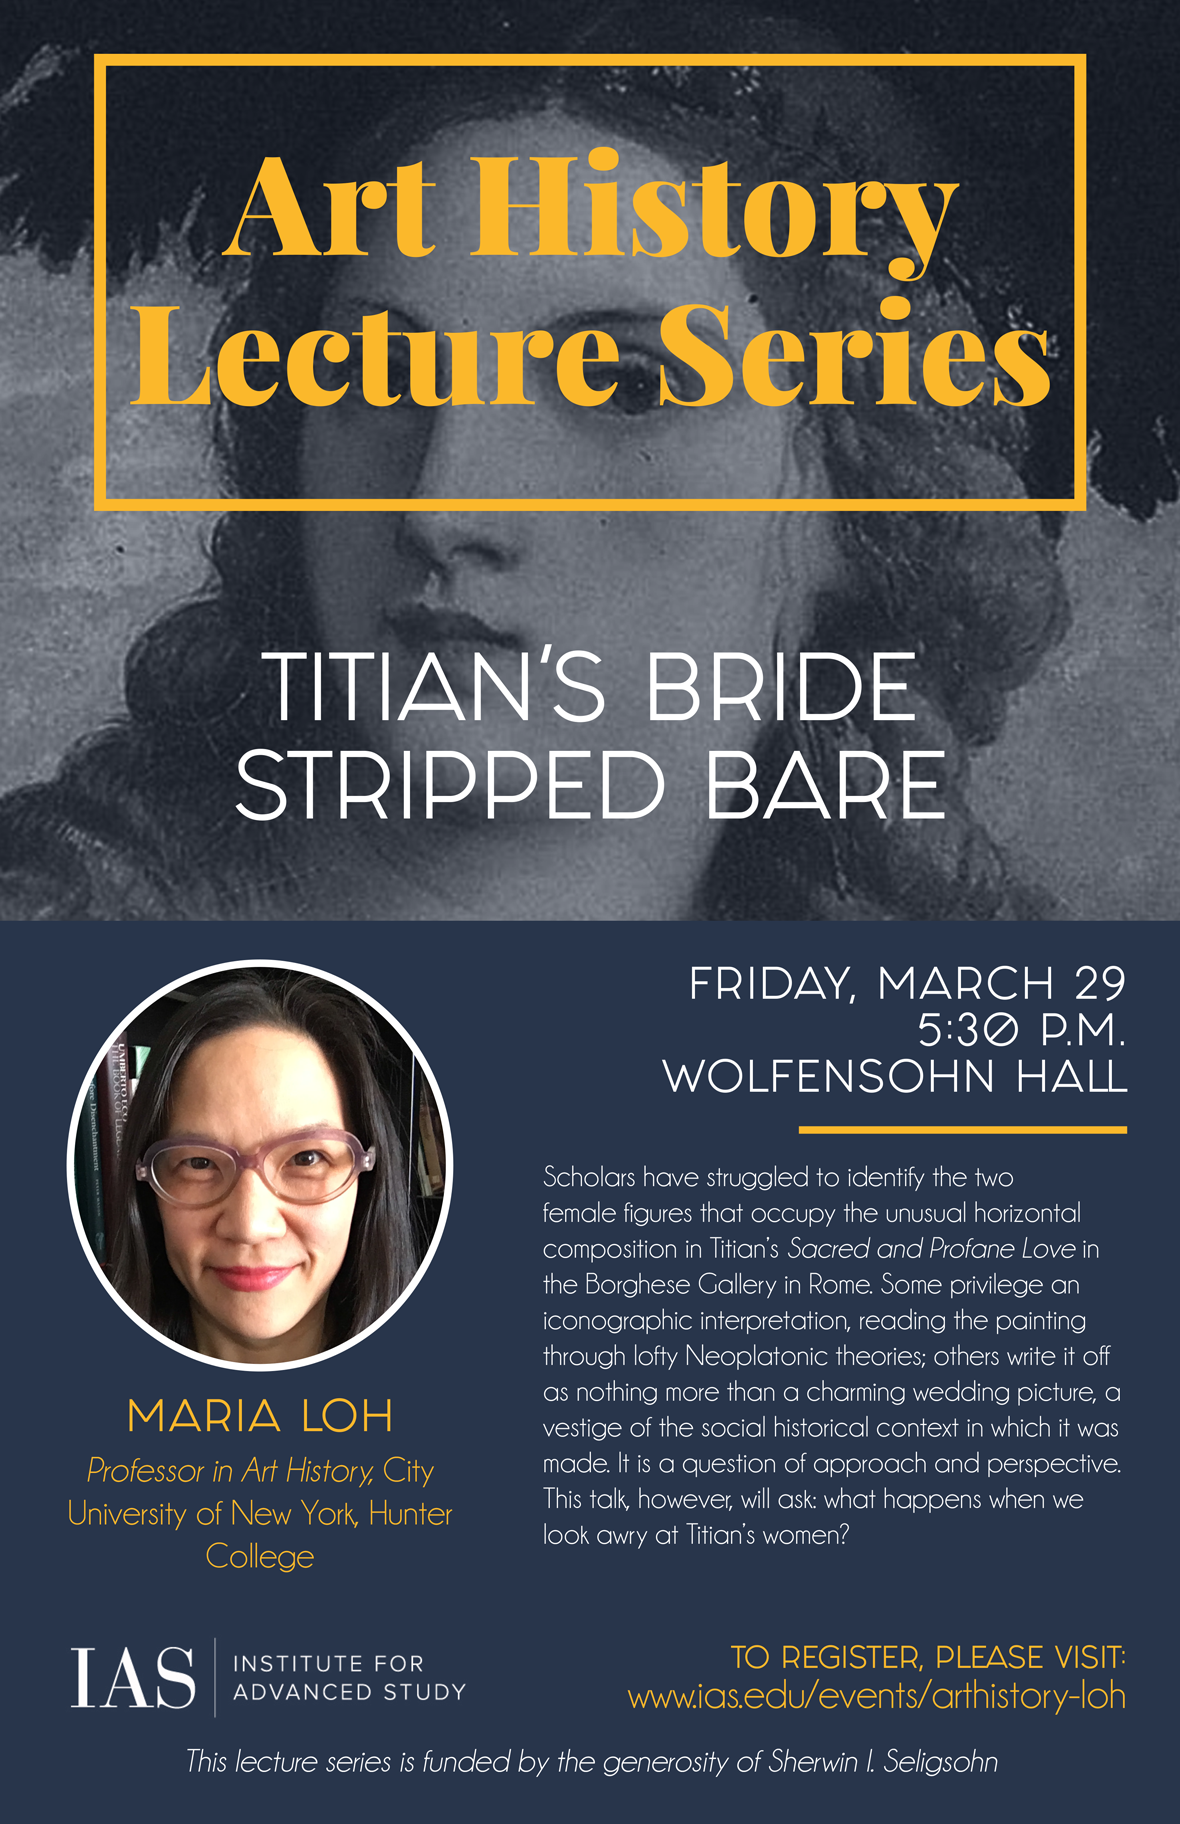 Art History Lecture Series Maria Loh Events Institute for Advanced